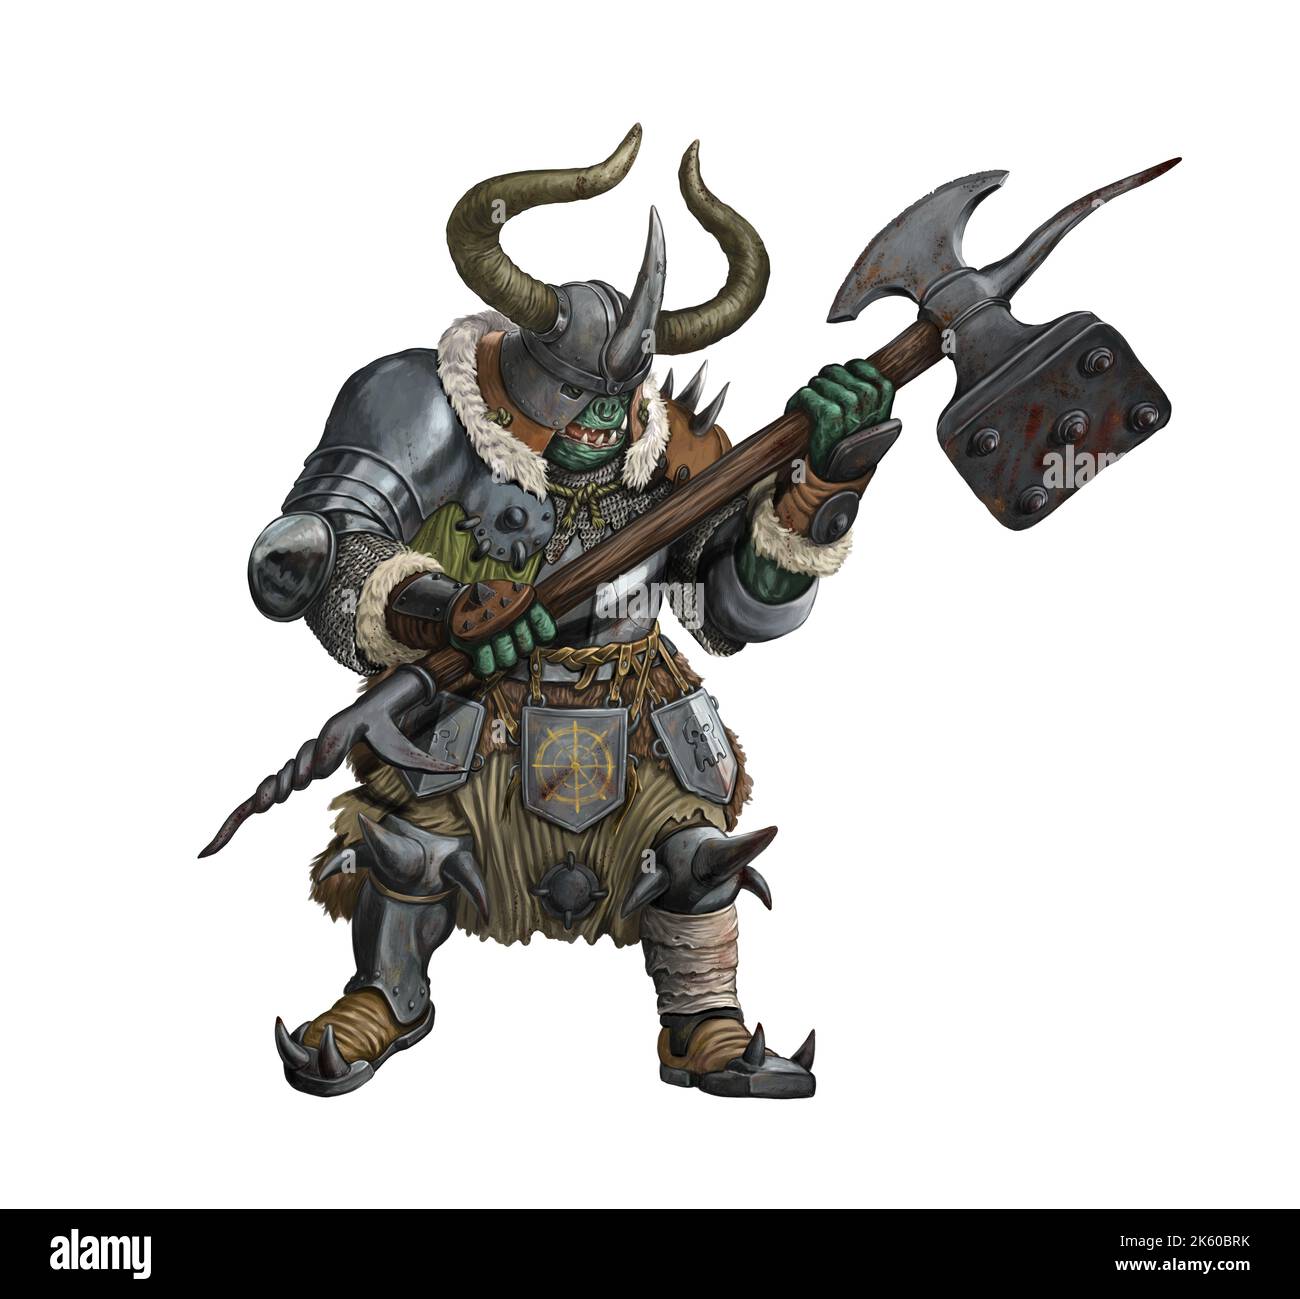 Fantasy creature - orc warrior attack. Fantasy illustration. Goblin with ax drawing. Stock Photo